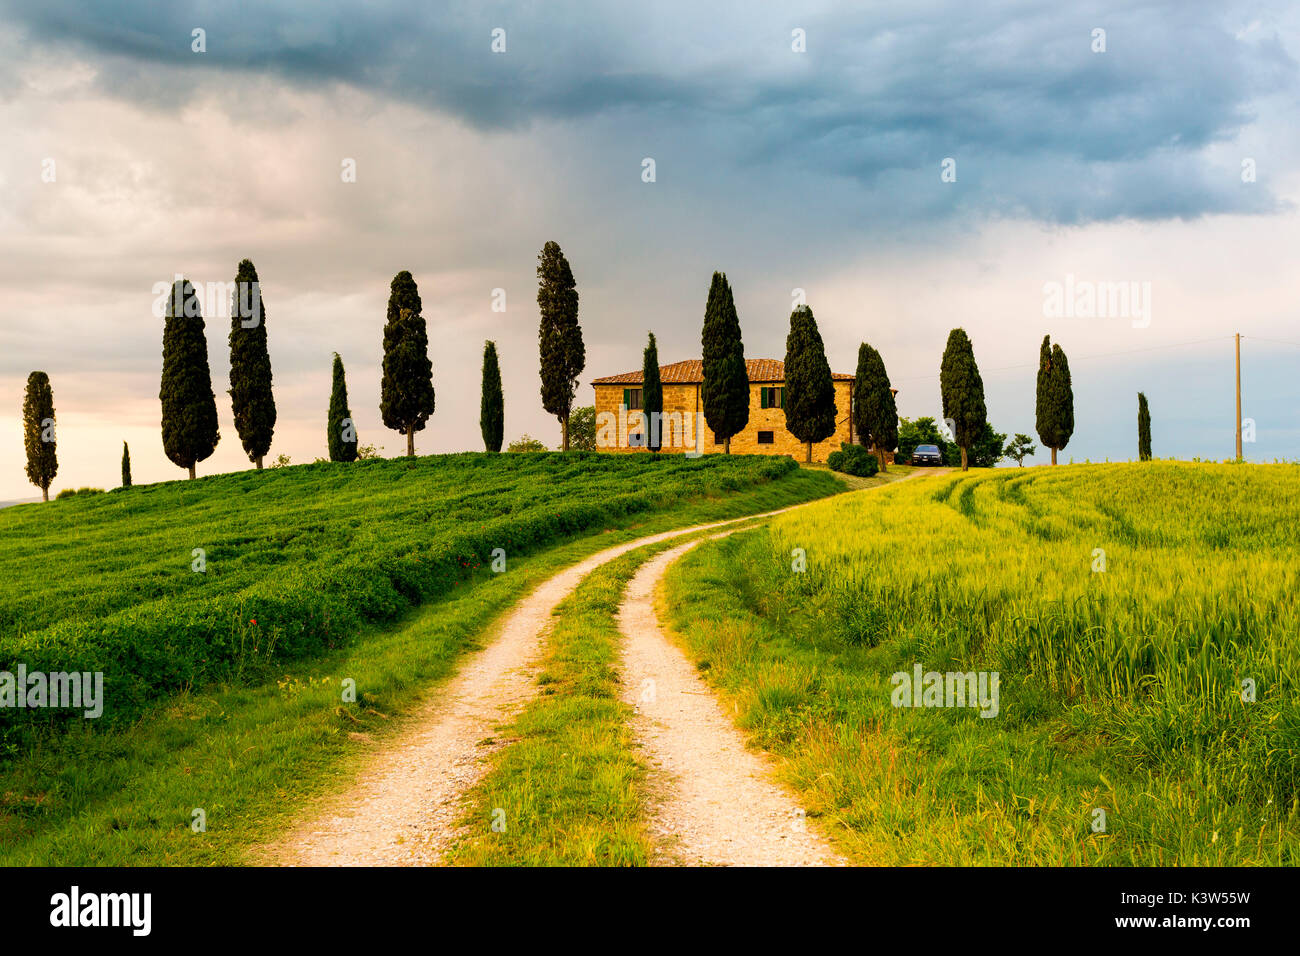 Val d'Orcia, Tuscany, Italy. A lonely farmhouse with cypress trees standing in line in foreground. Stock Photo